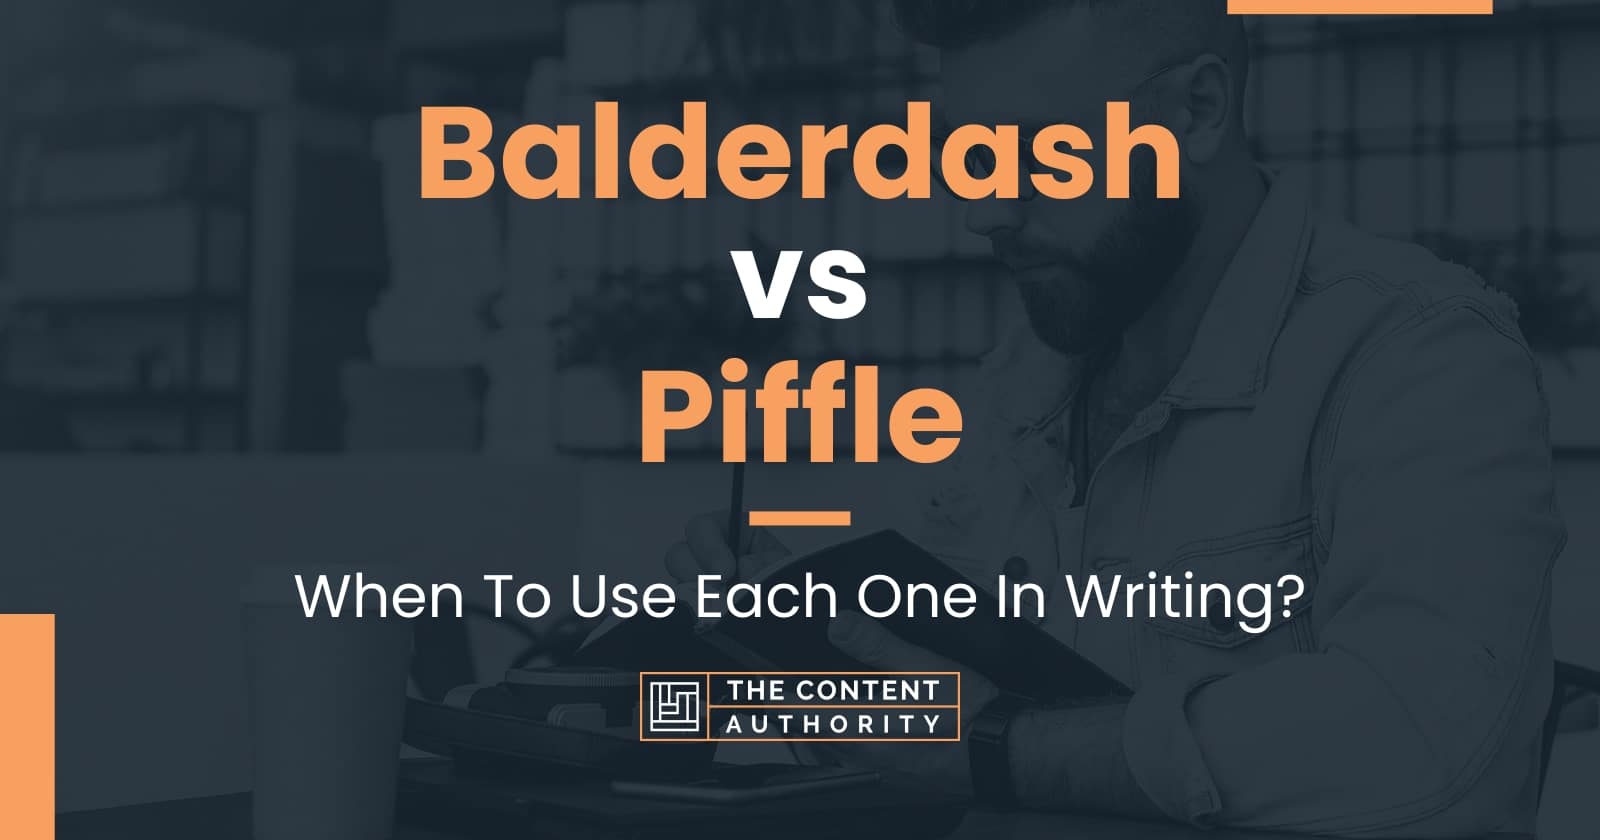 Balderdash vs Piffle: When To Use Each One In Writing?